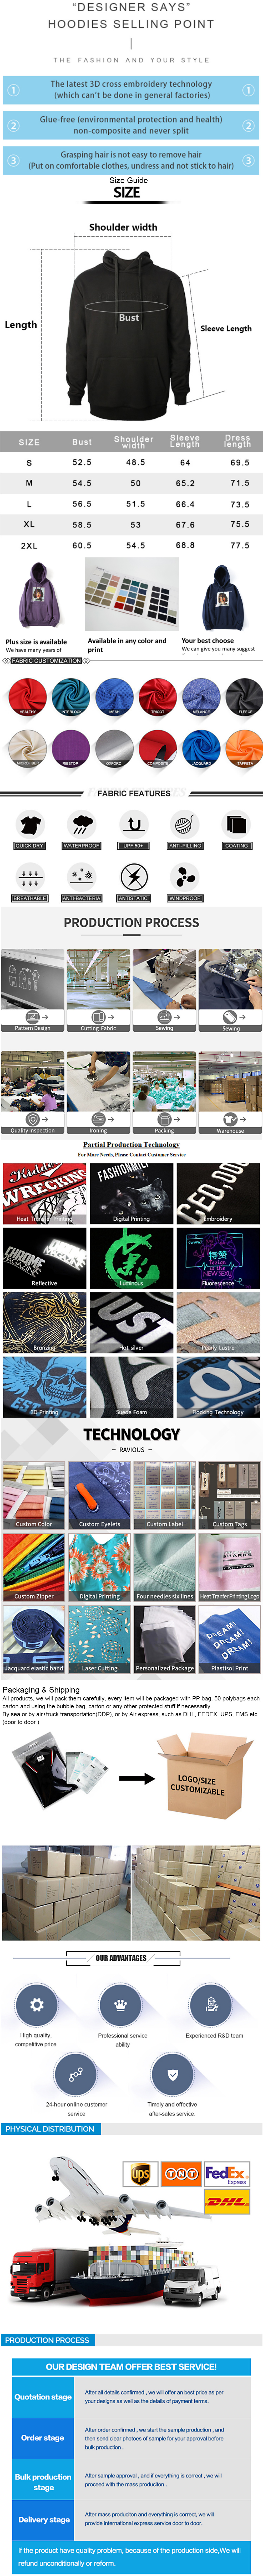 Good quality 100% thickness premium cotton mens t shirts custom embroidery